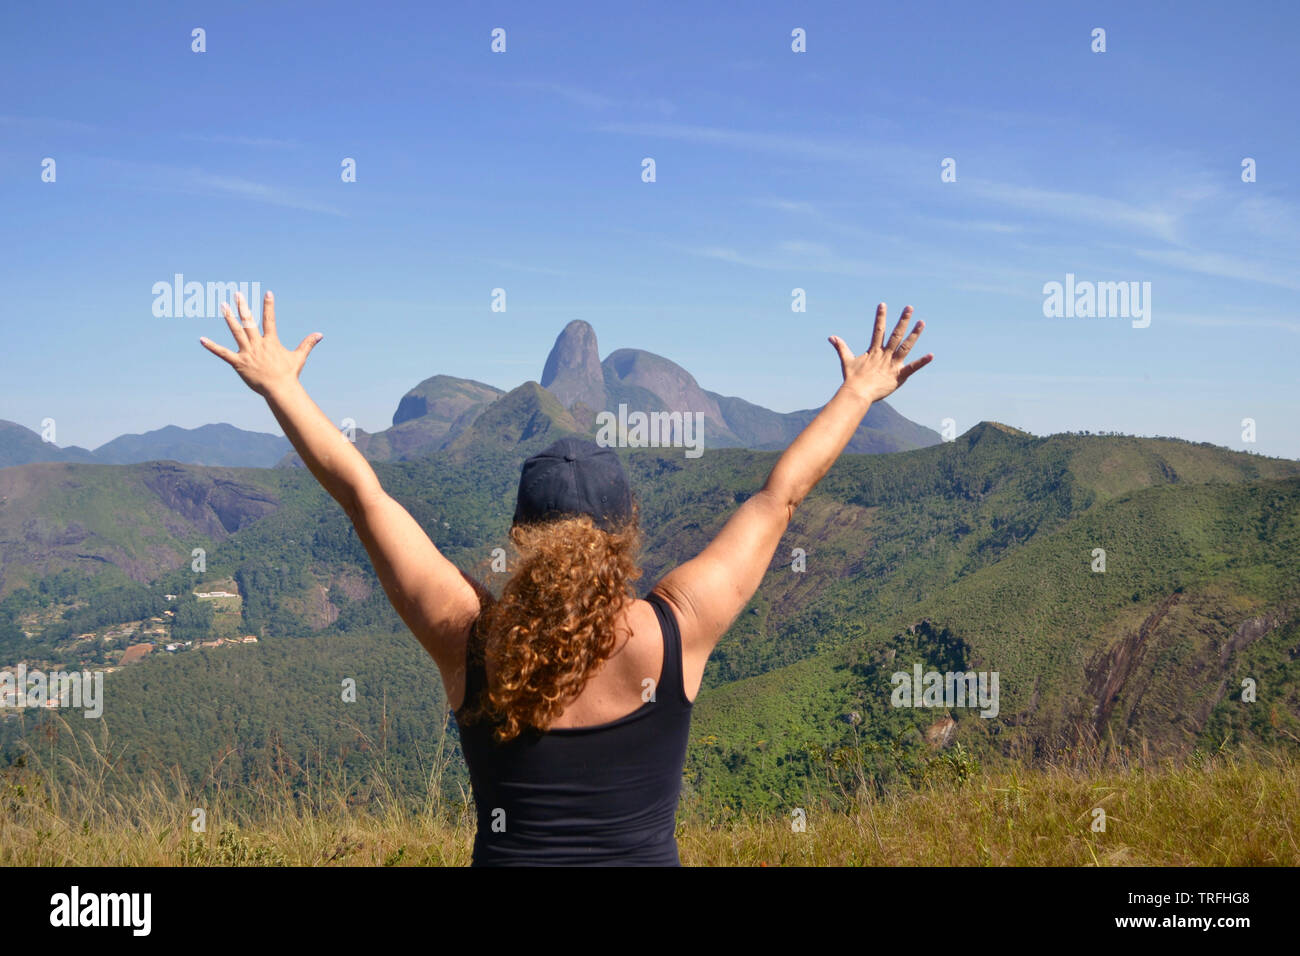 midle age woman on the top of a montain. Concept of success, freedom, joy, self estime, adventure Stock Photo